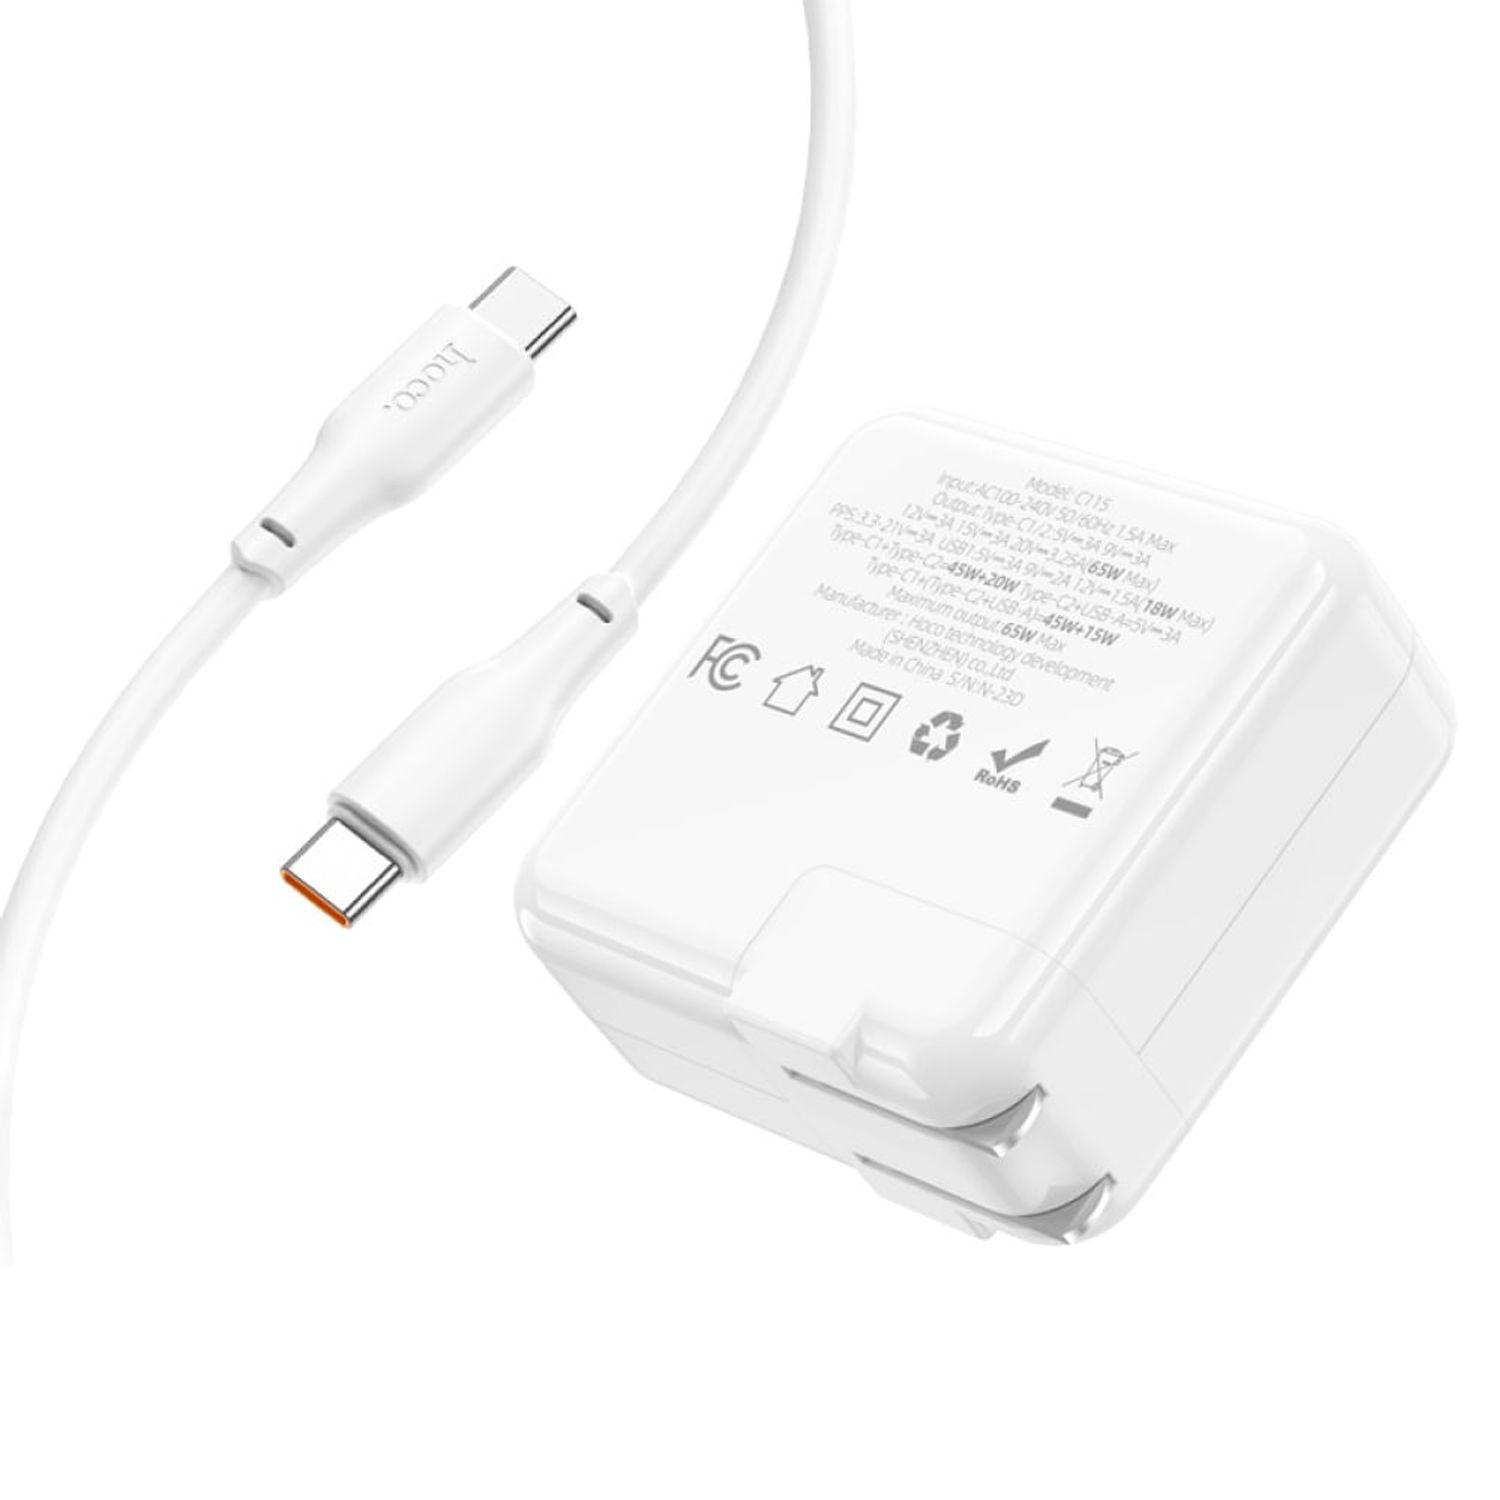 Contact Cargador USB-C 20W Power Delivery + Cable Tipo-C 3A Blanco